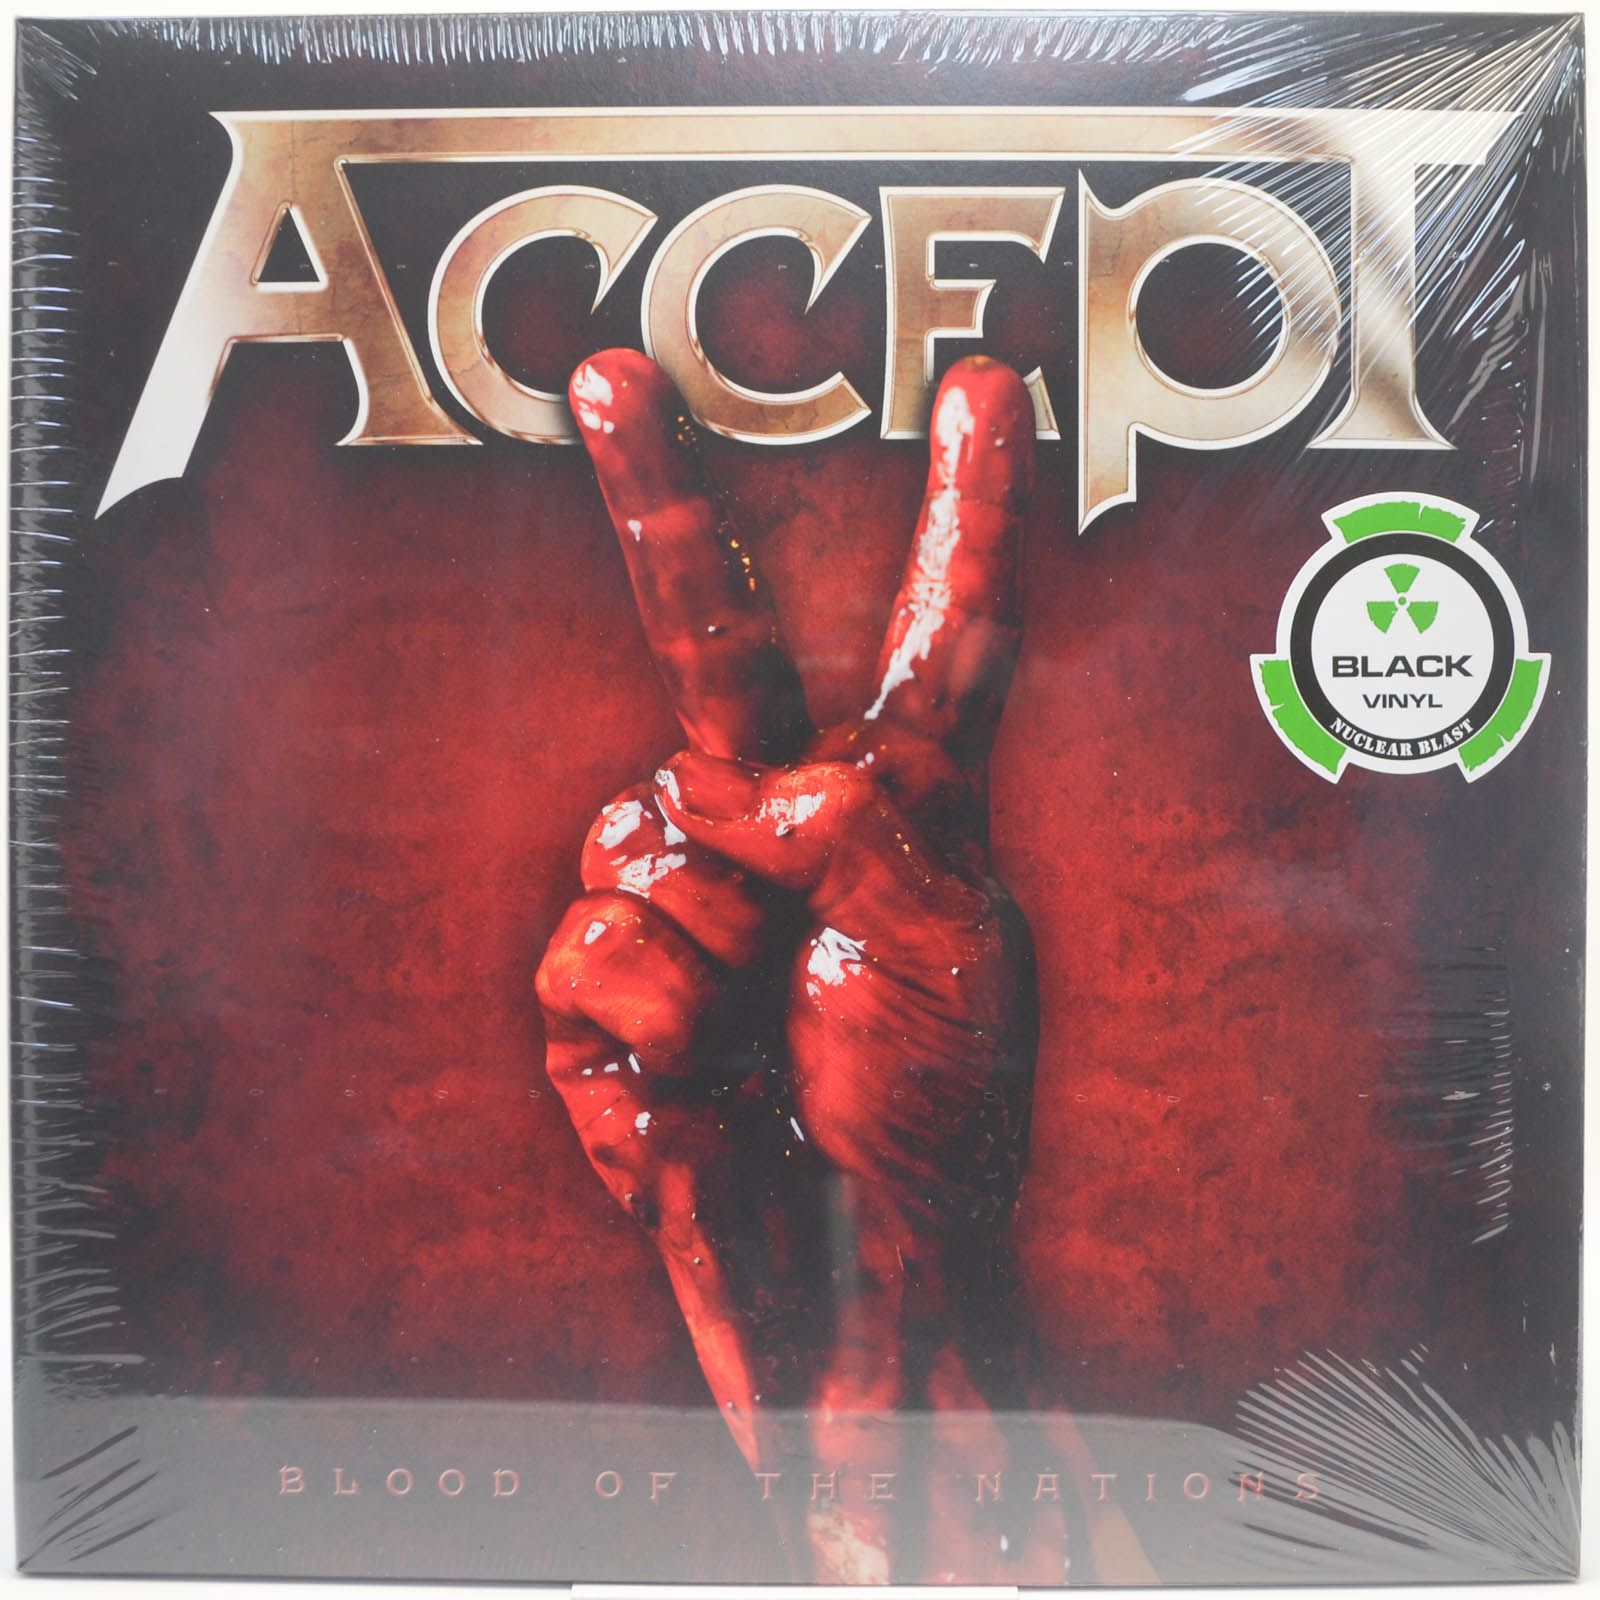 Accept — Blood Of The Nations (2LP), 2010